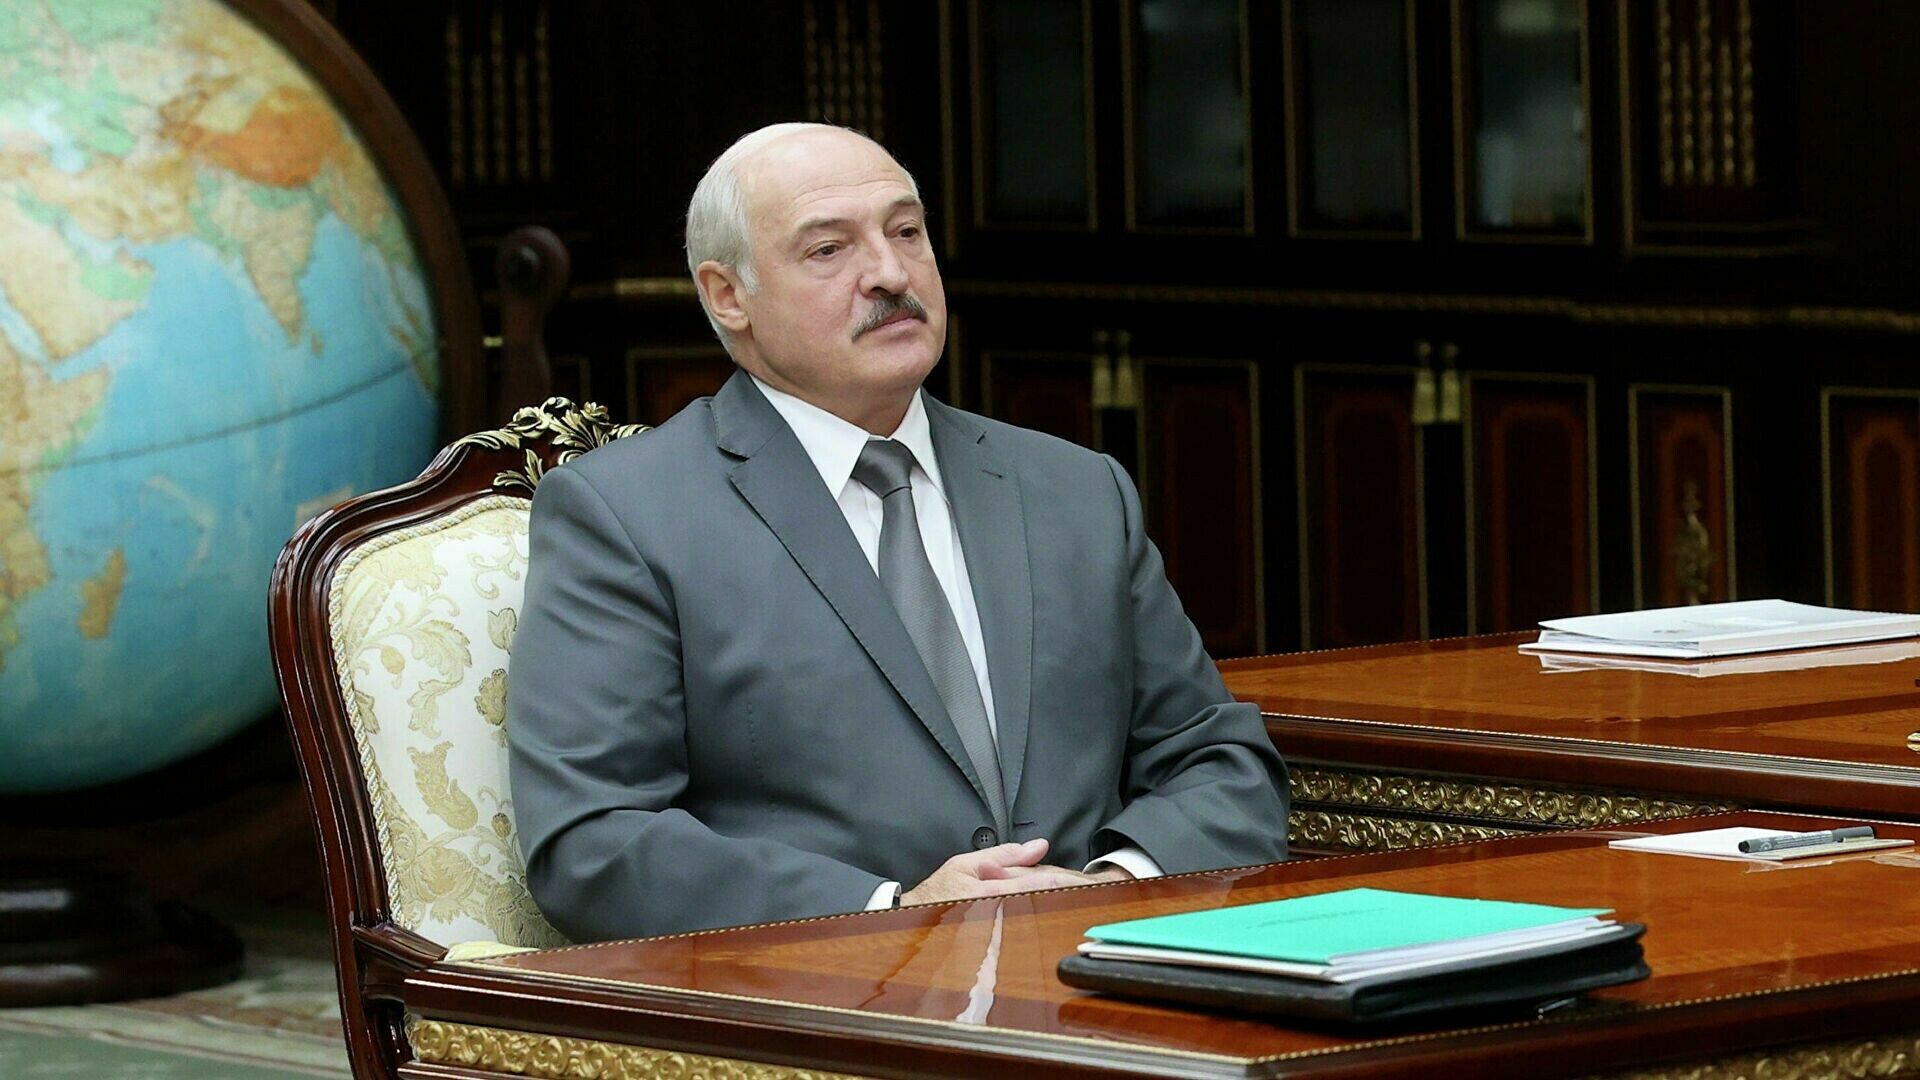 Lukashenko stated that Germany and EU failed to fulfill their obligations on migrants